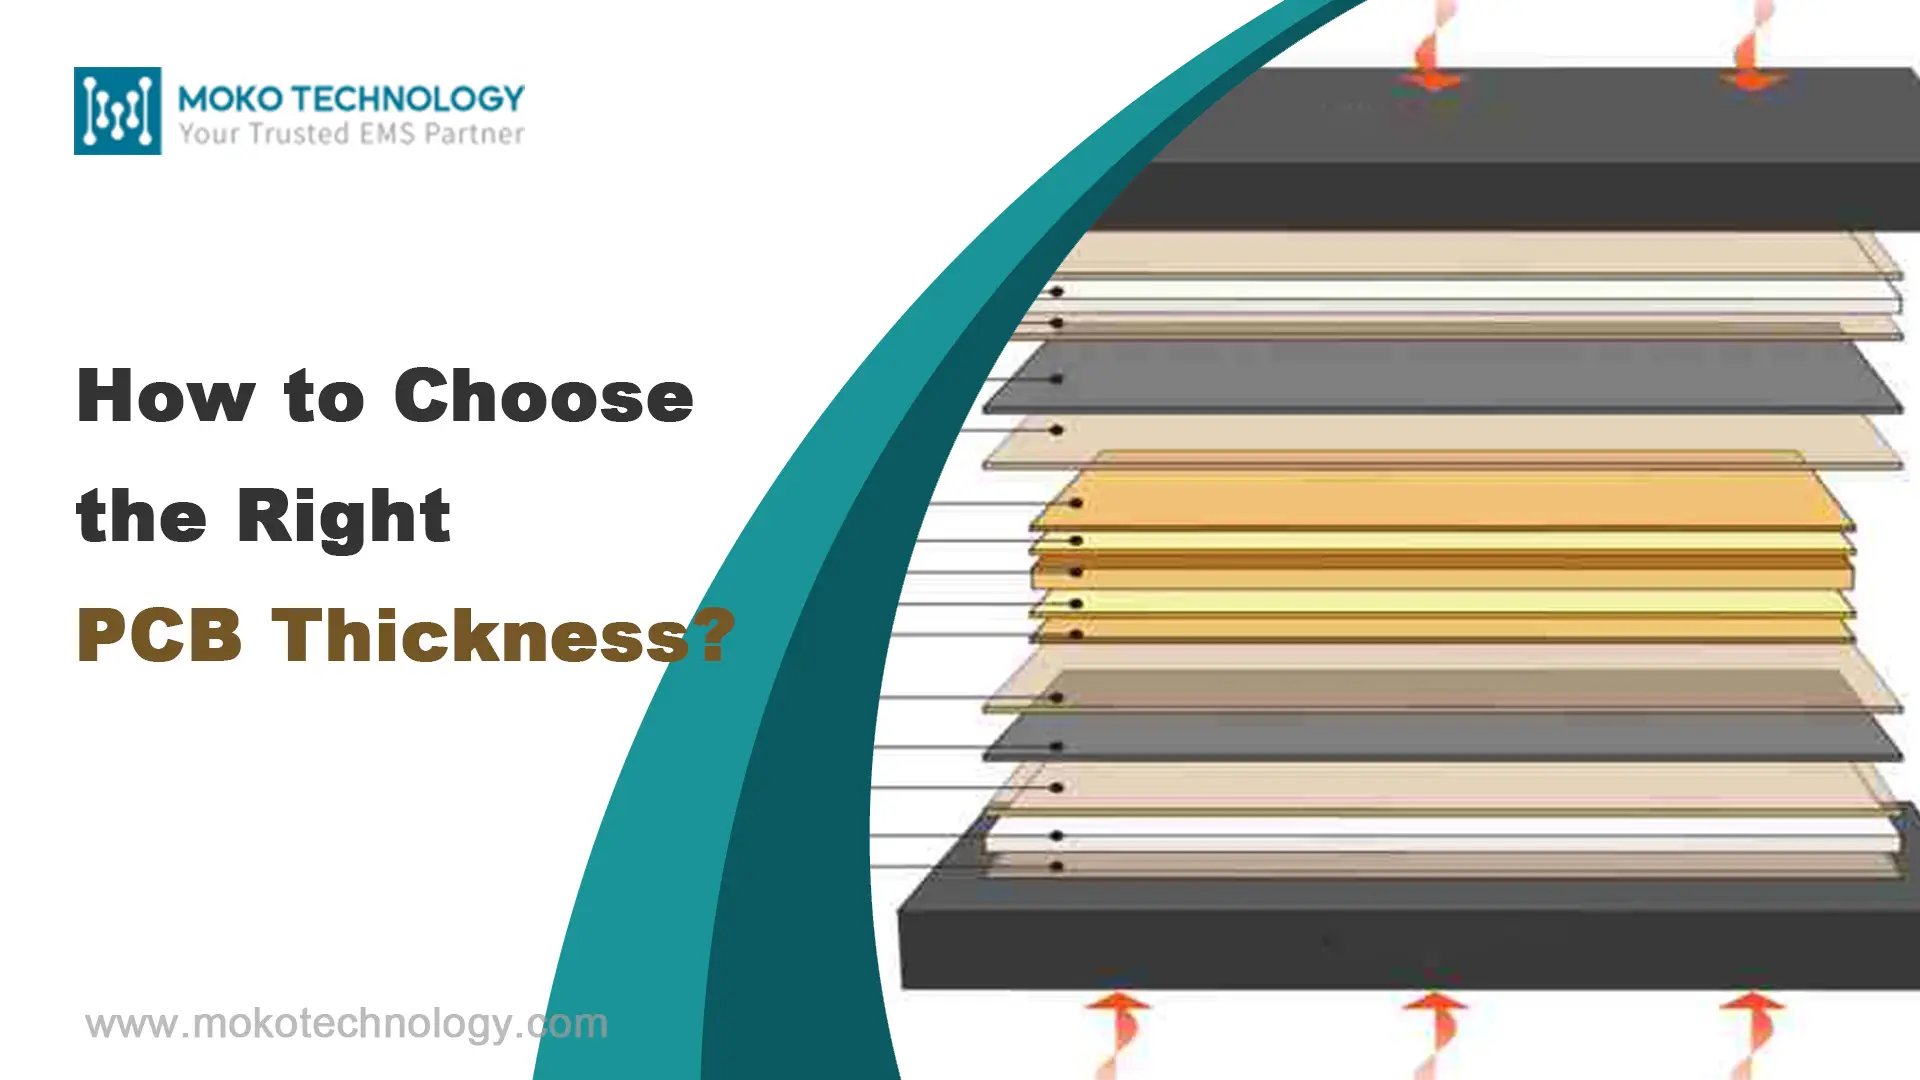 How to choose the right PCB Thickness